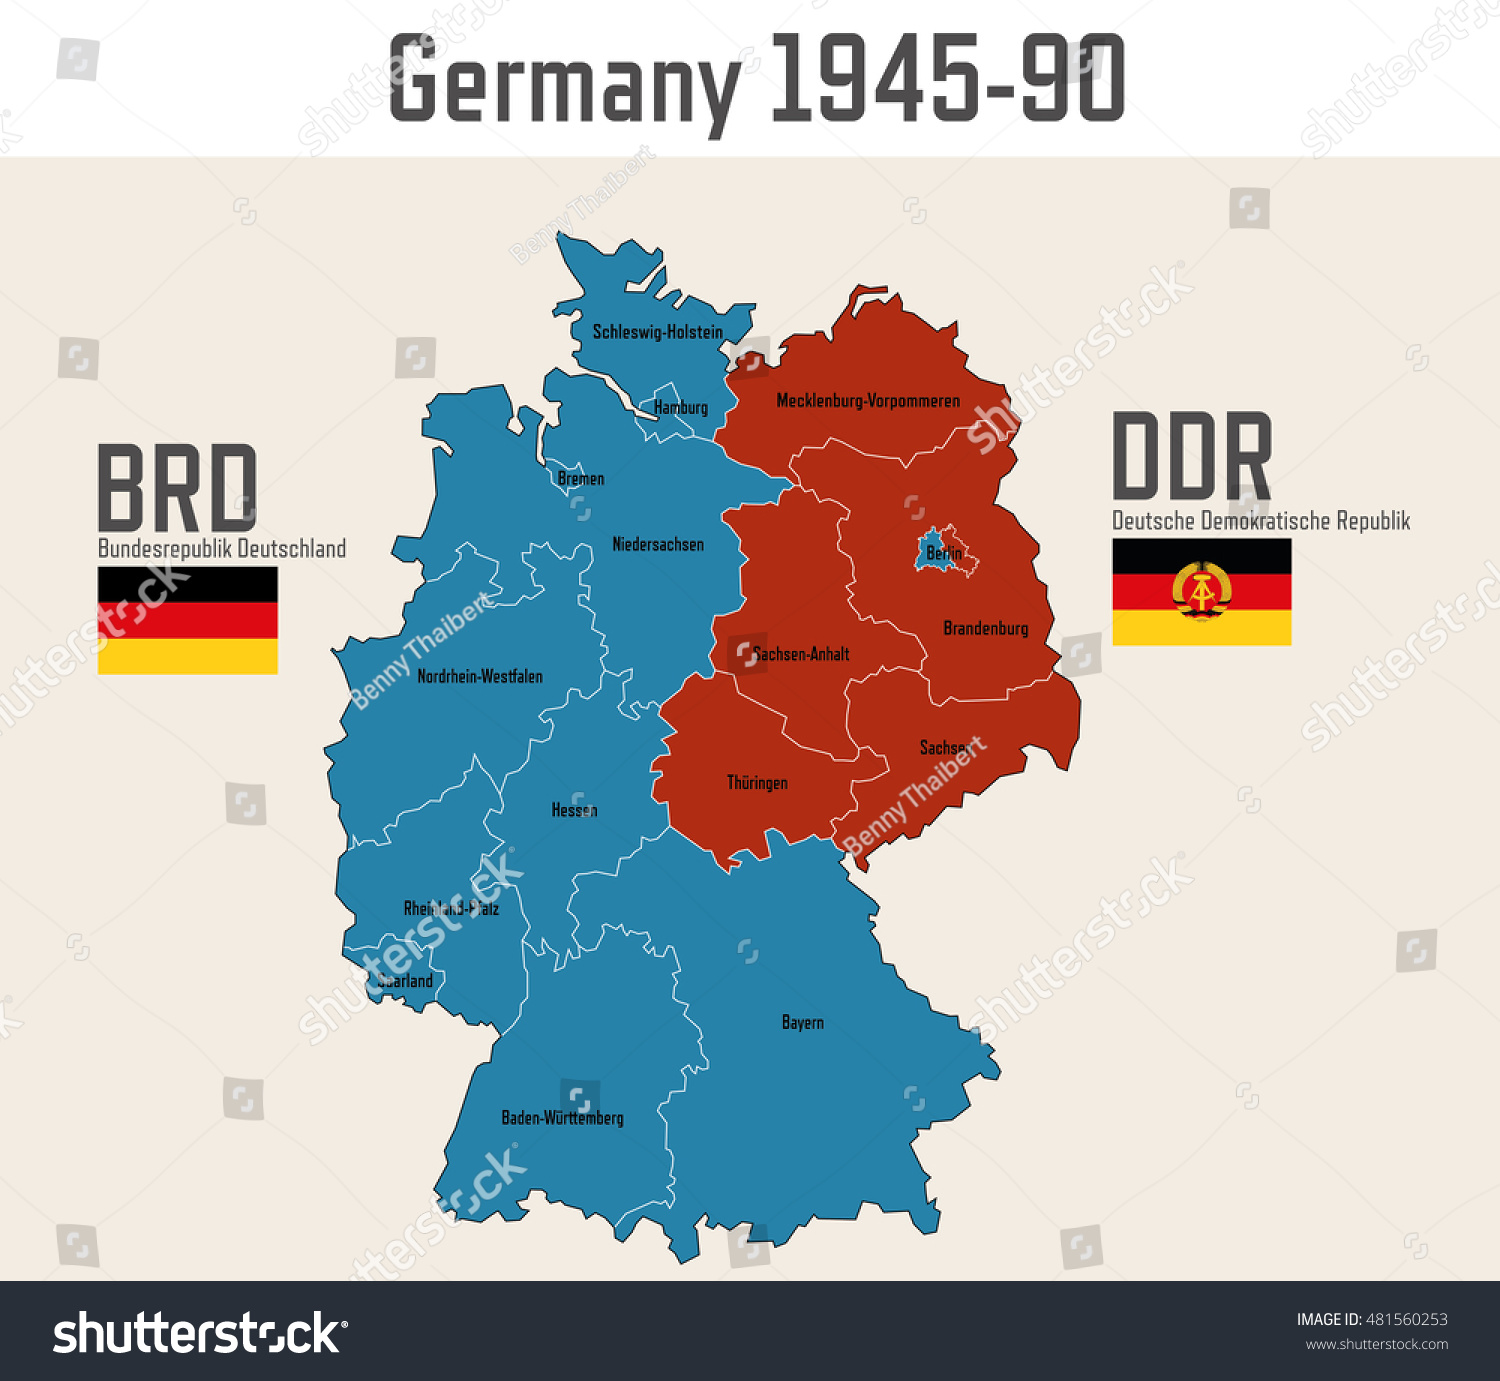 east and west germany map cold war Germany Cold War Map Flags Eastern Stock Vector Royalty Free east and west germany map cold war